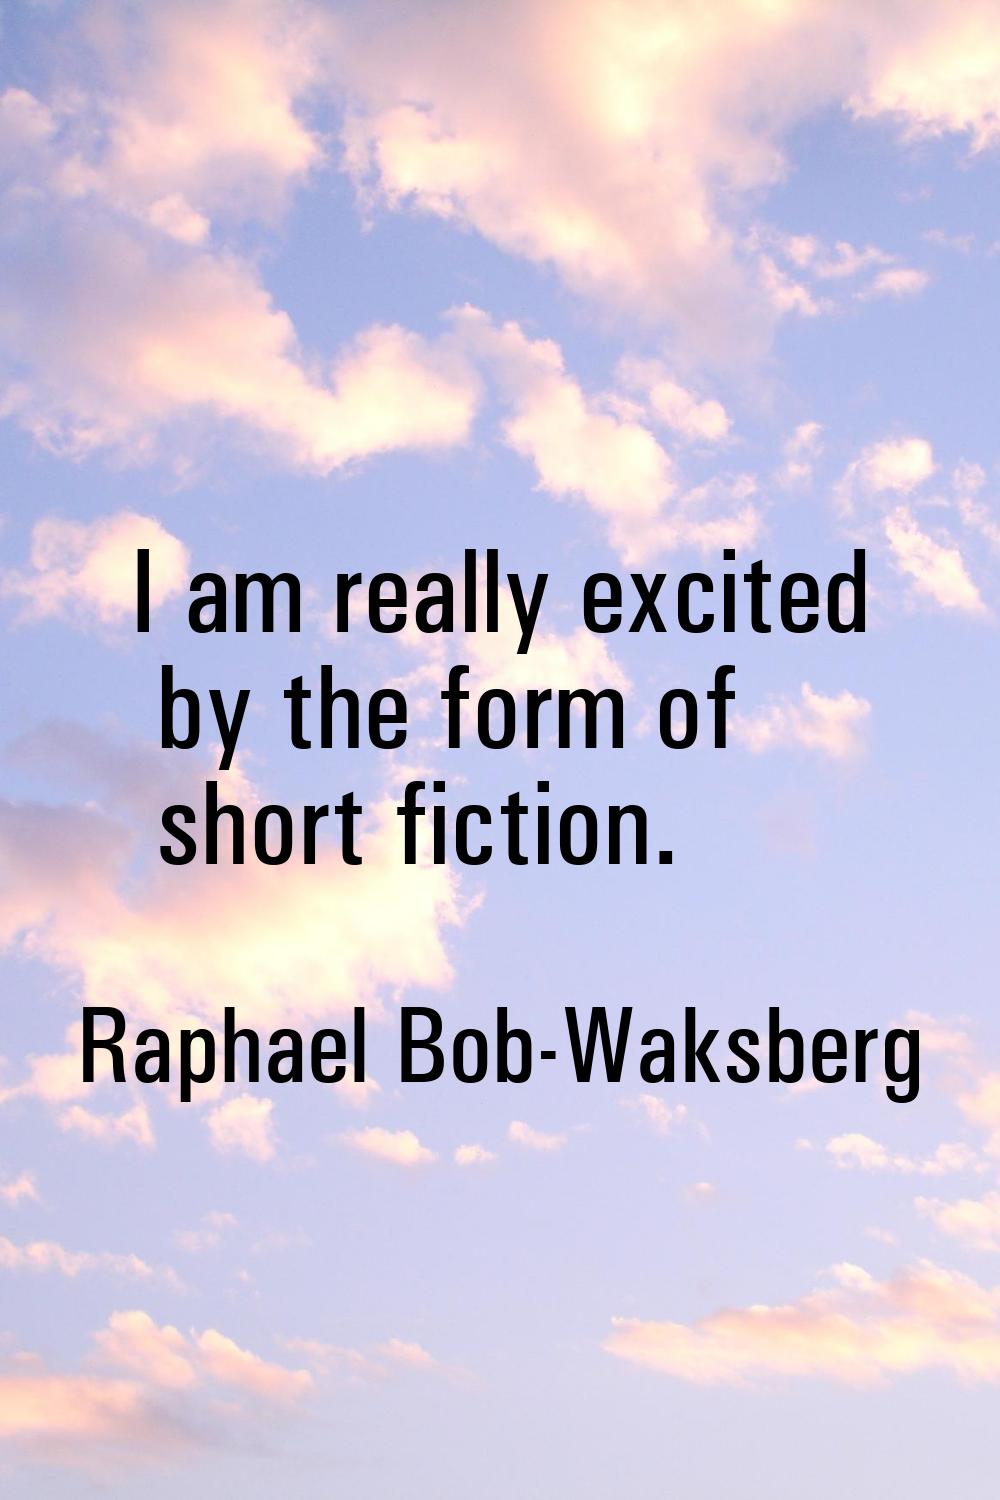 I am really excited by the form of short fiction.